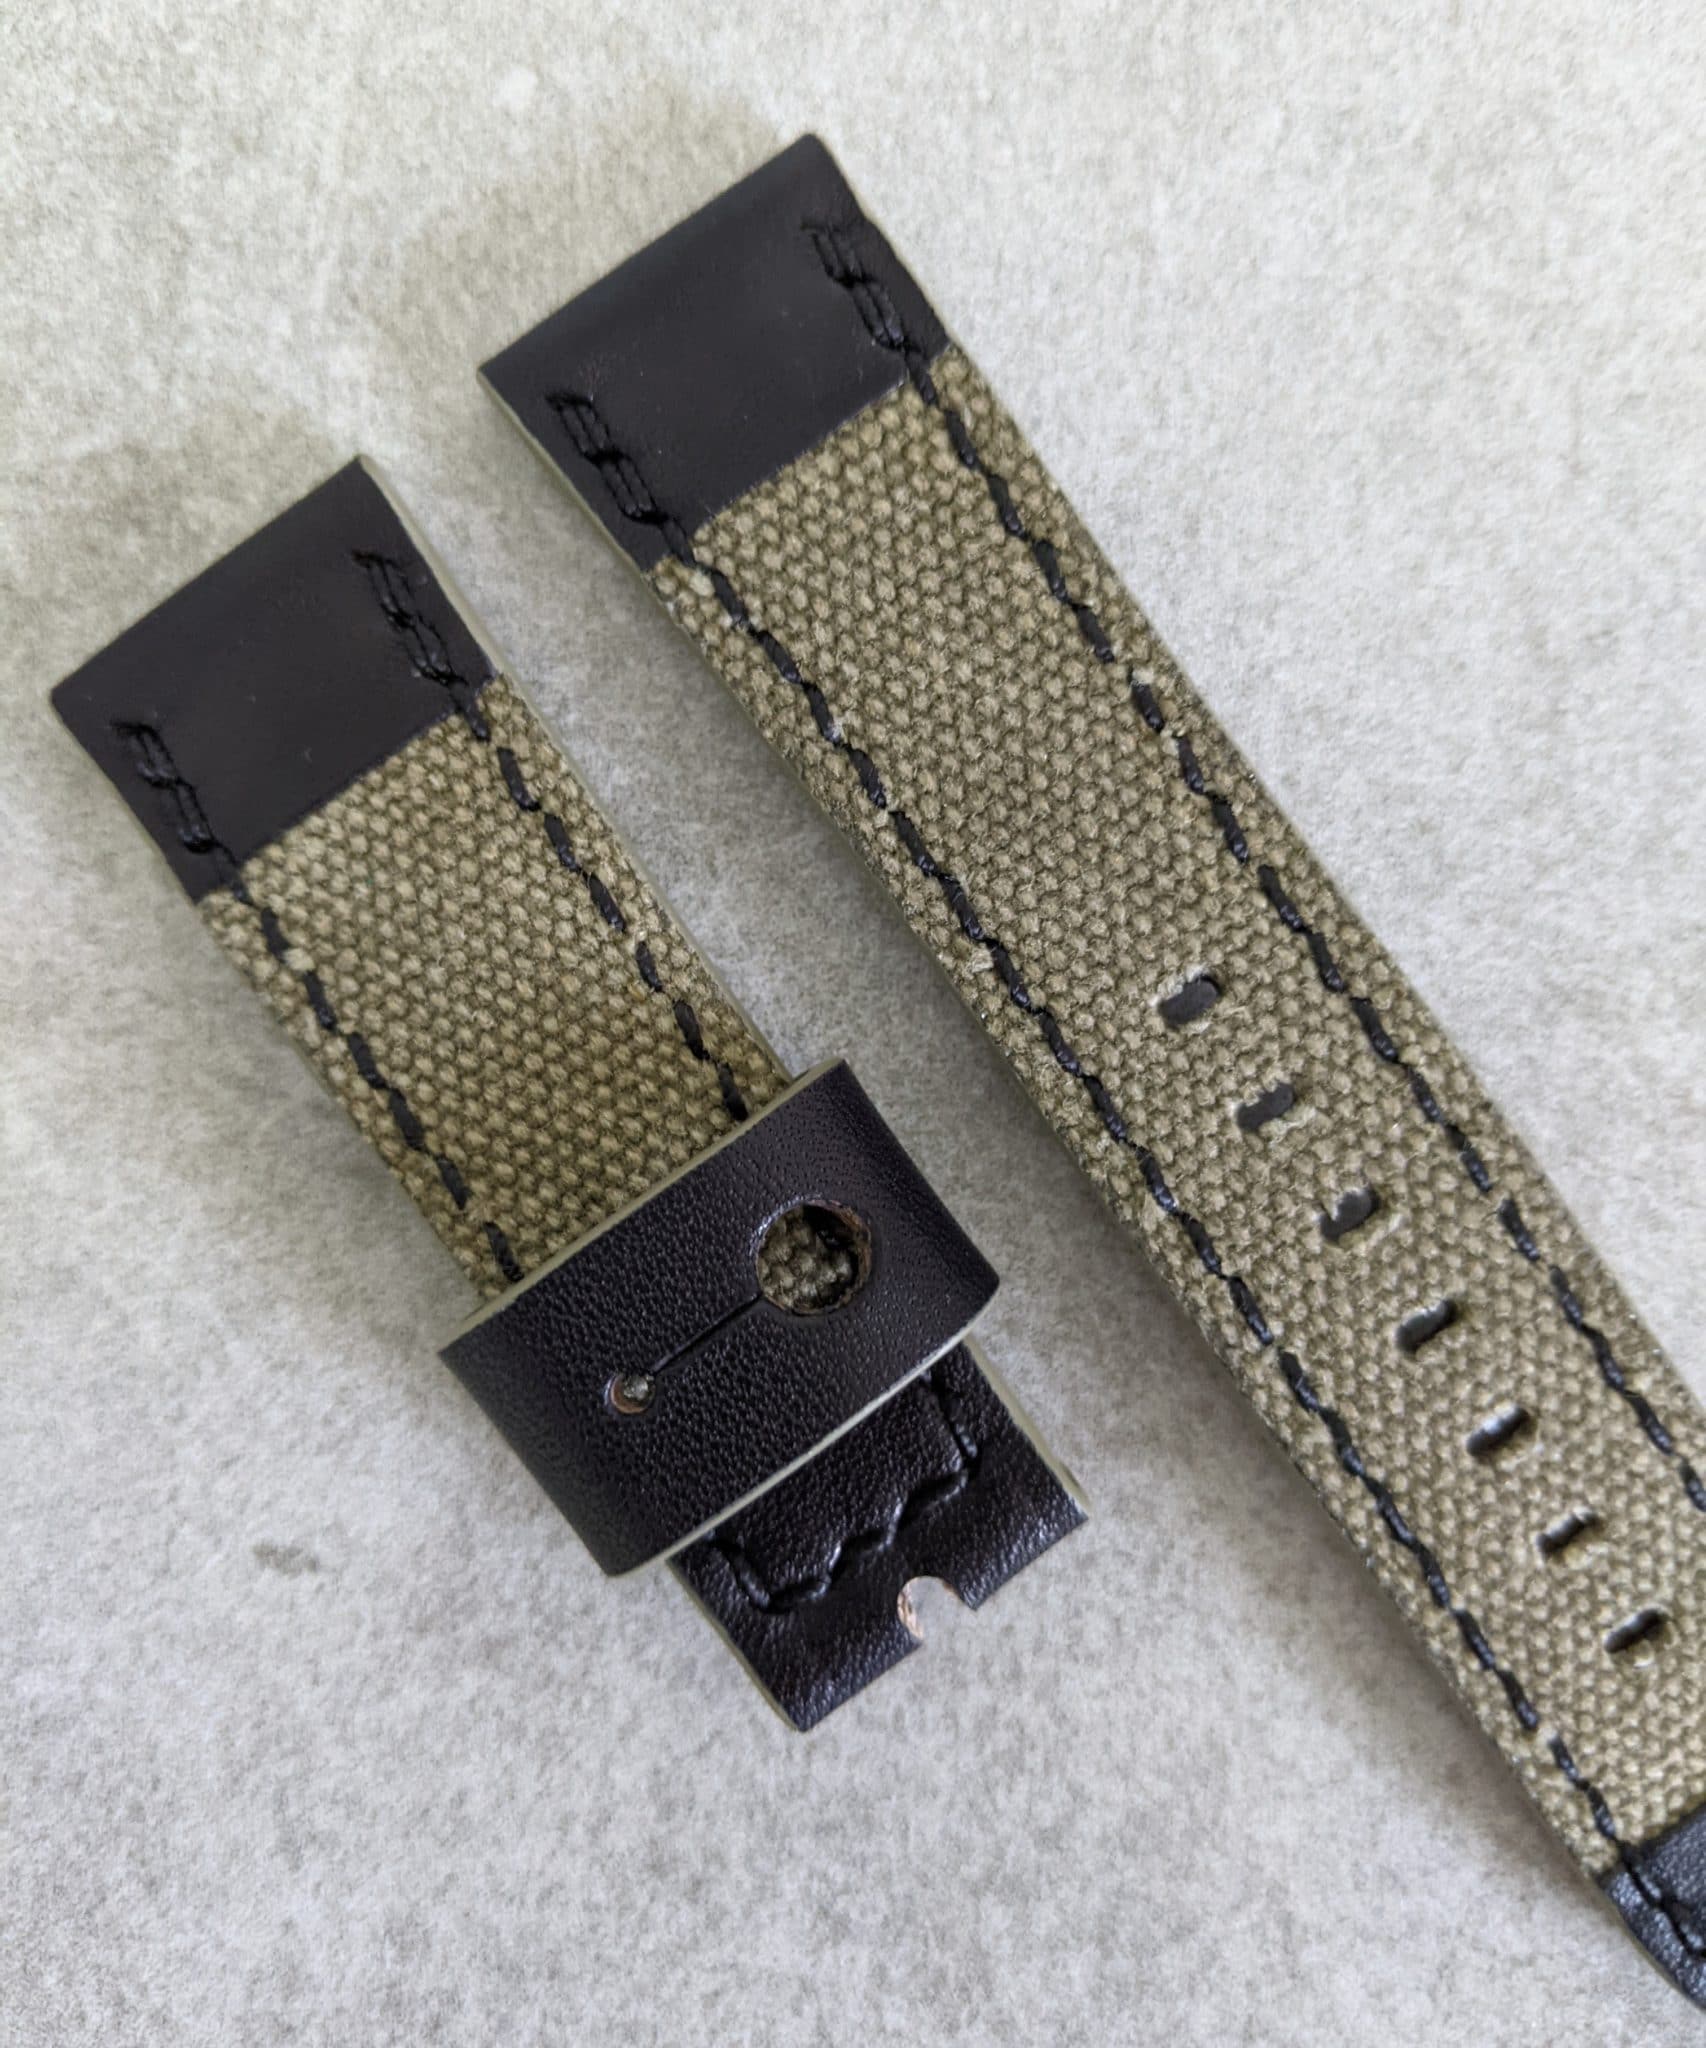 Canvas & Leather Strap - Army Green + Black - The Strap Tailor